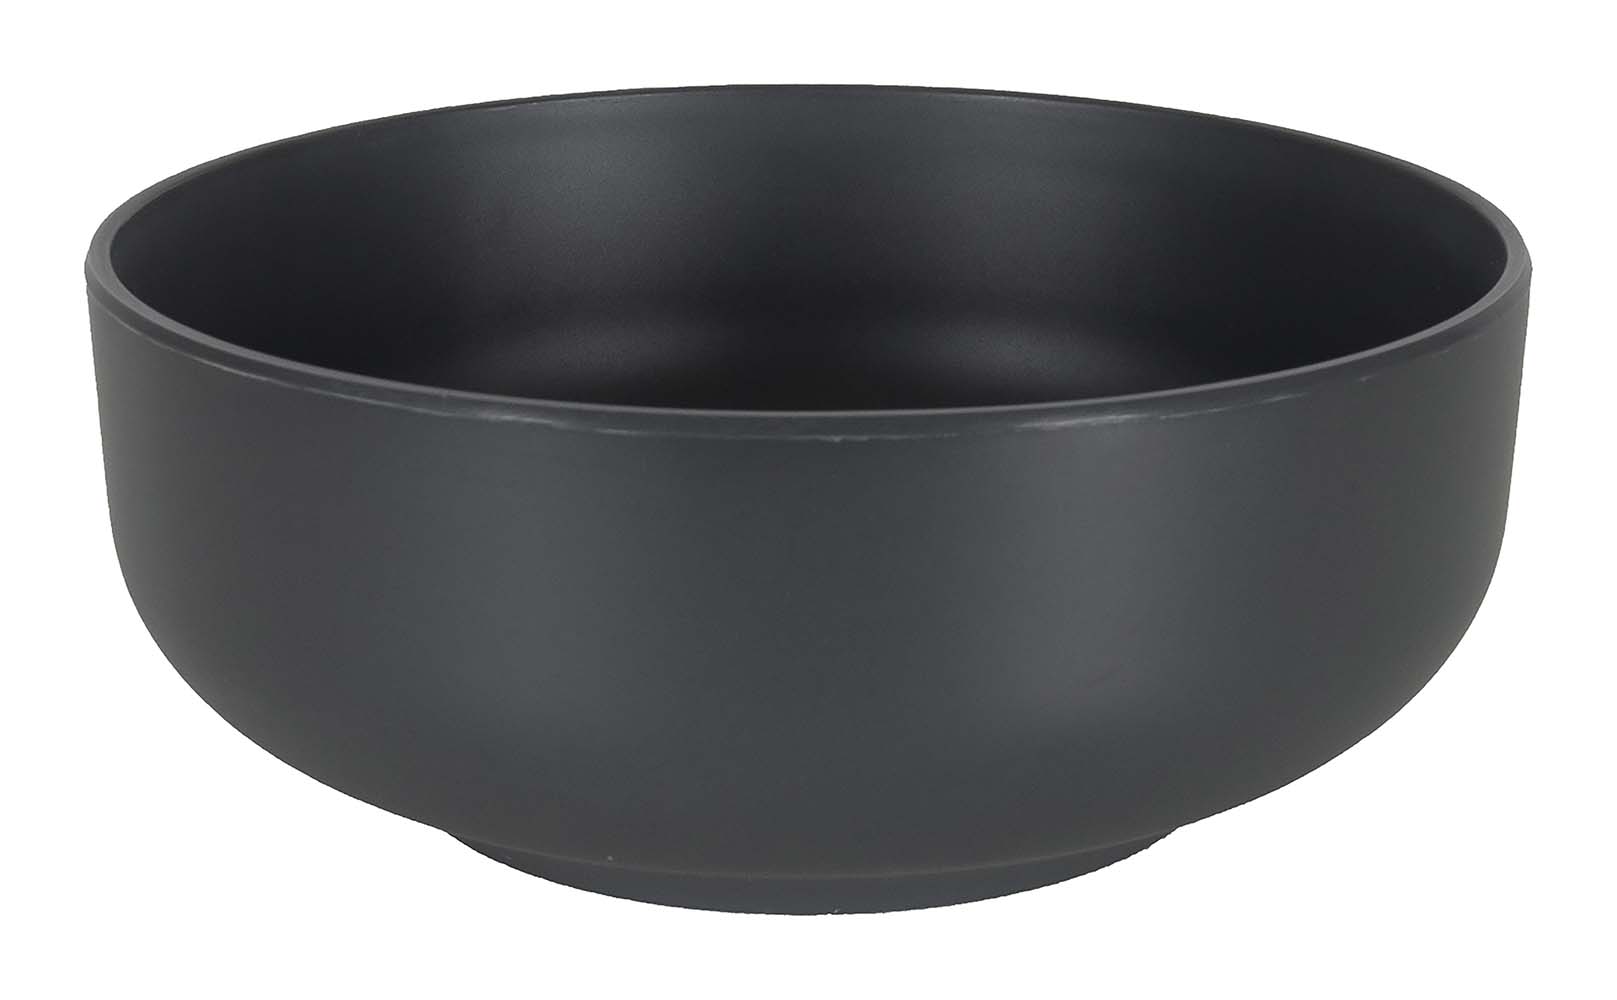 6181476 This Industrial Patom bowls have a robust look. The anthracite dinnerware has a sturdy look with raised edge. Besides the beautiful design, the dinnerware is very light and sturdy. The bowls are good to use on the campsite, as it is virtually unbreakable, shatterproof and scratch-resistant. The bowls can also be used perfectly at home. The 4-piece set is made of high quality 100% melamine and is dishwasher safe and food approved.